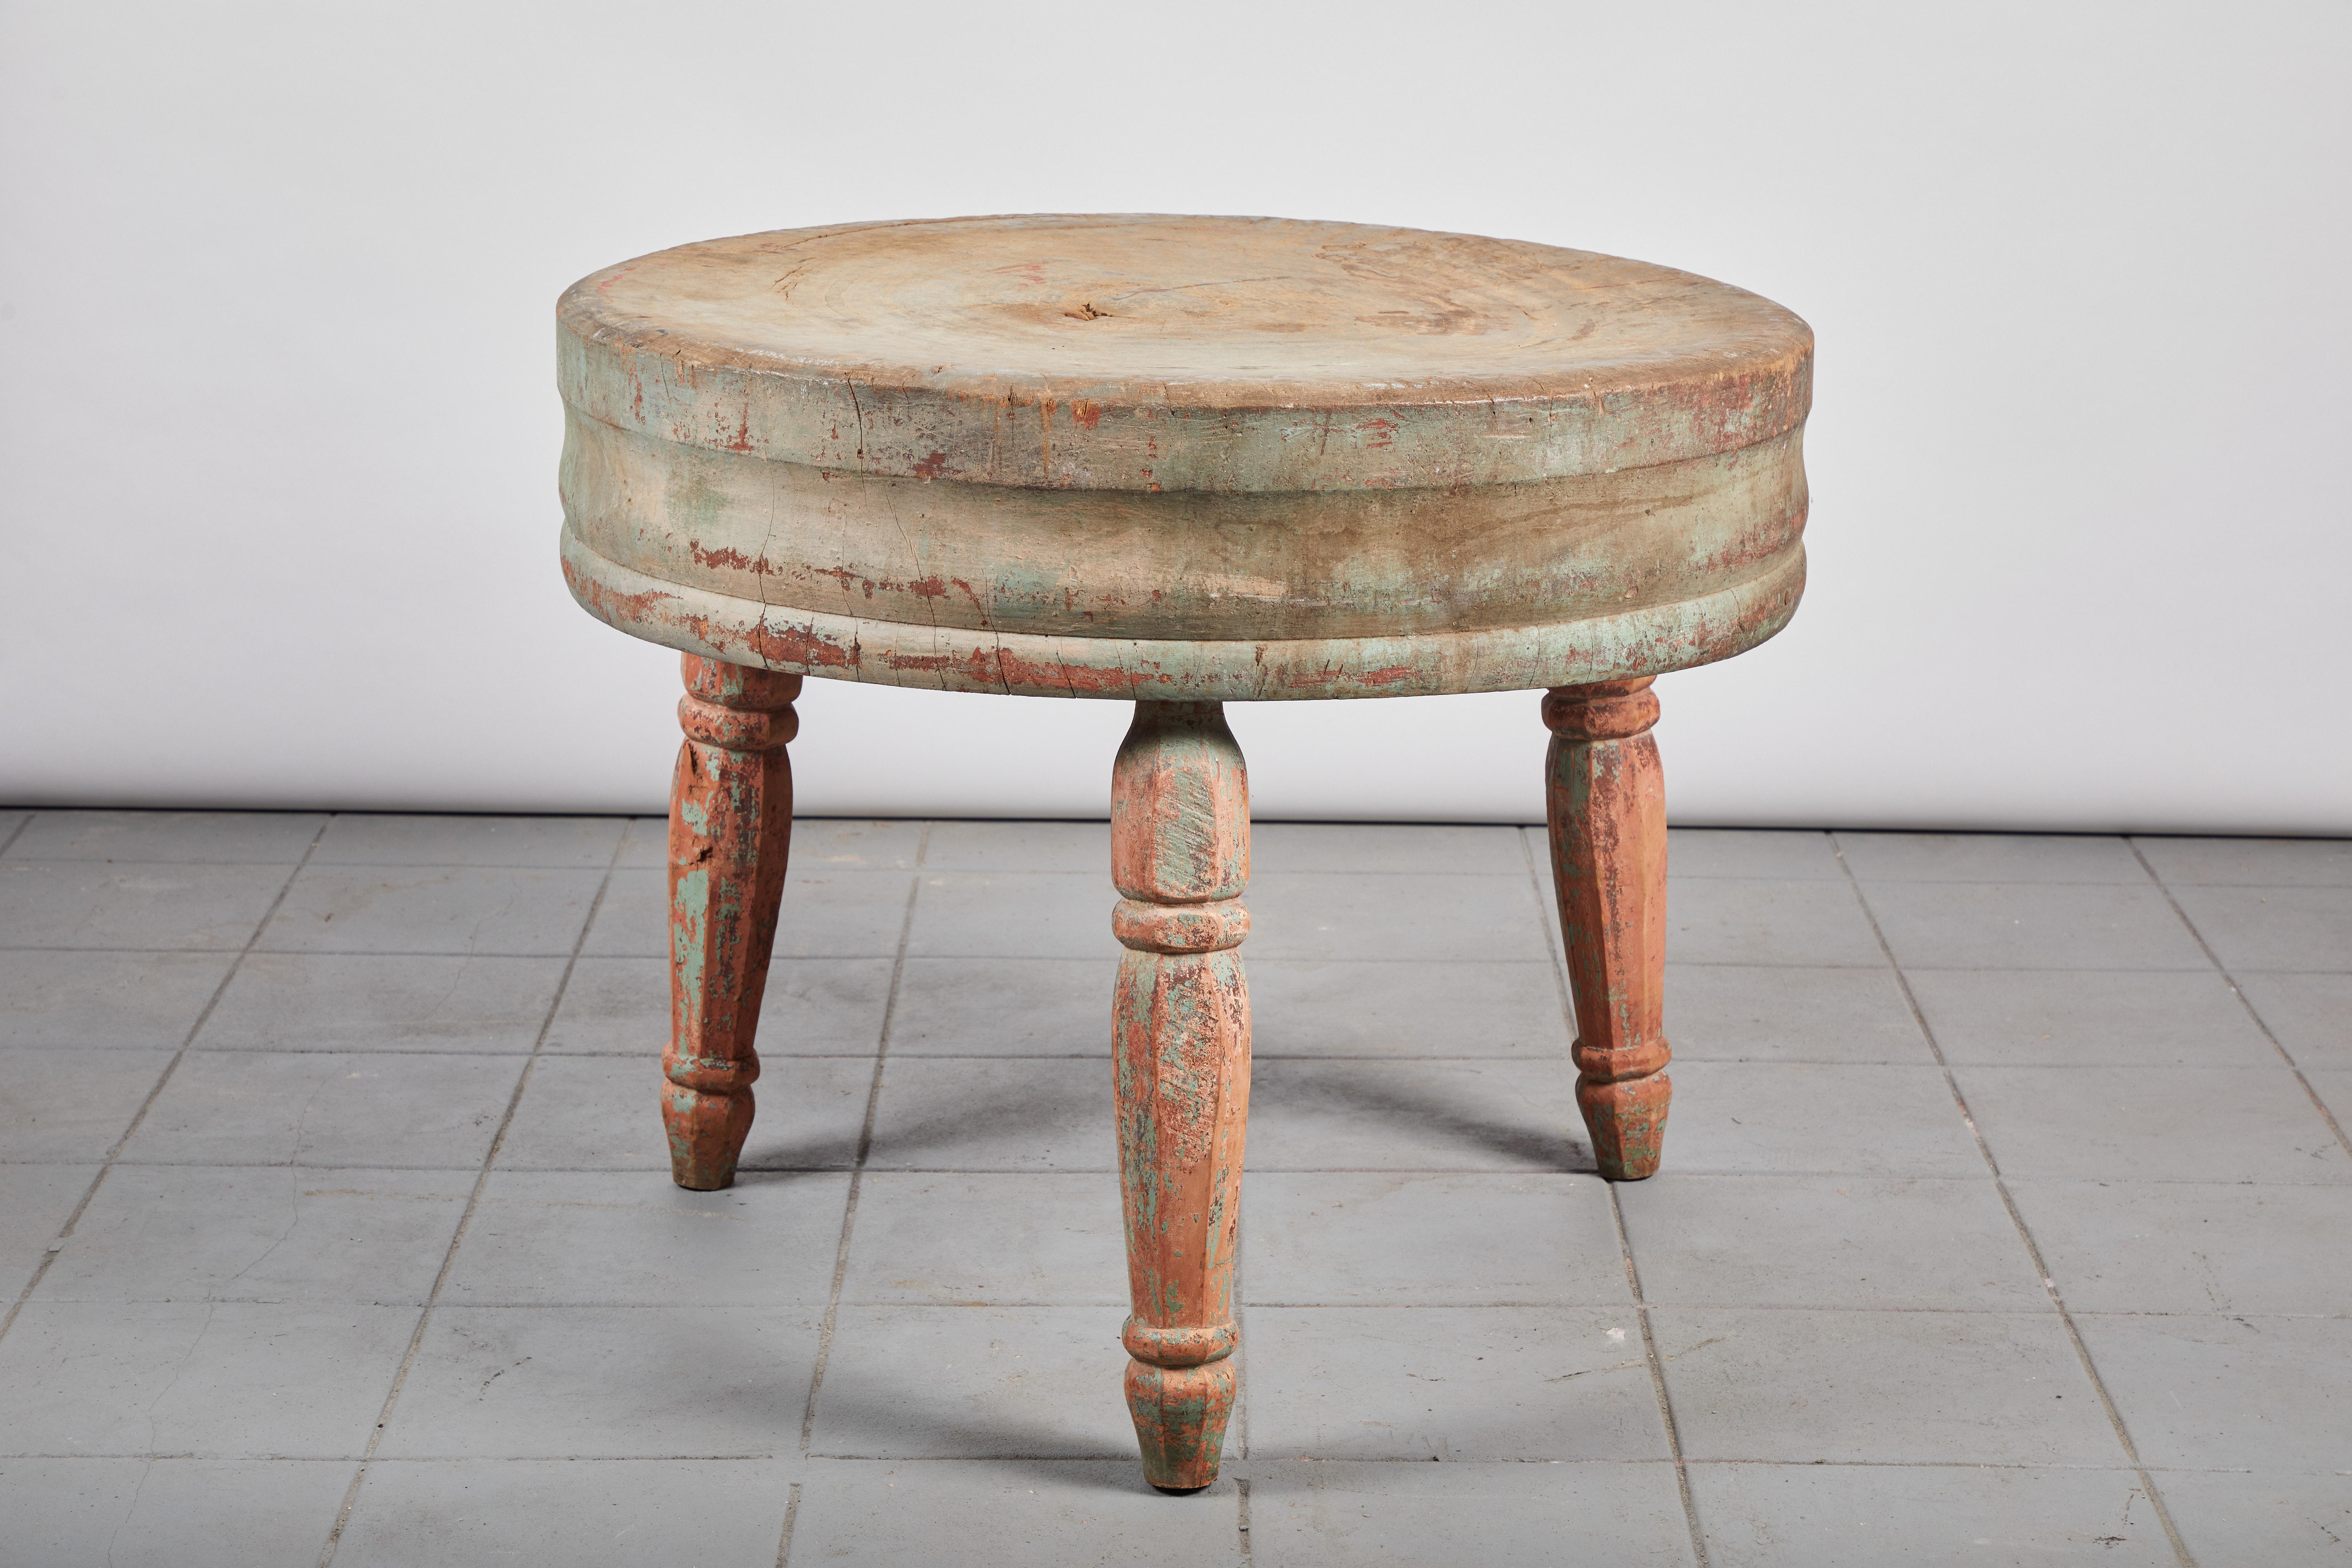 Wood Early American Rustic Round Butcher Block Table